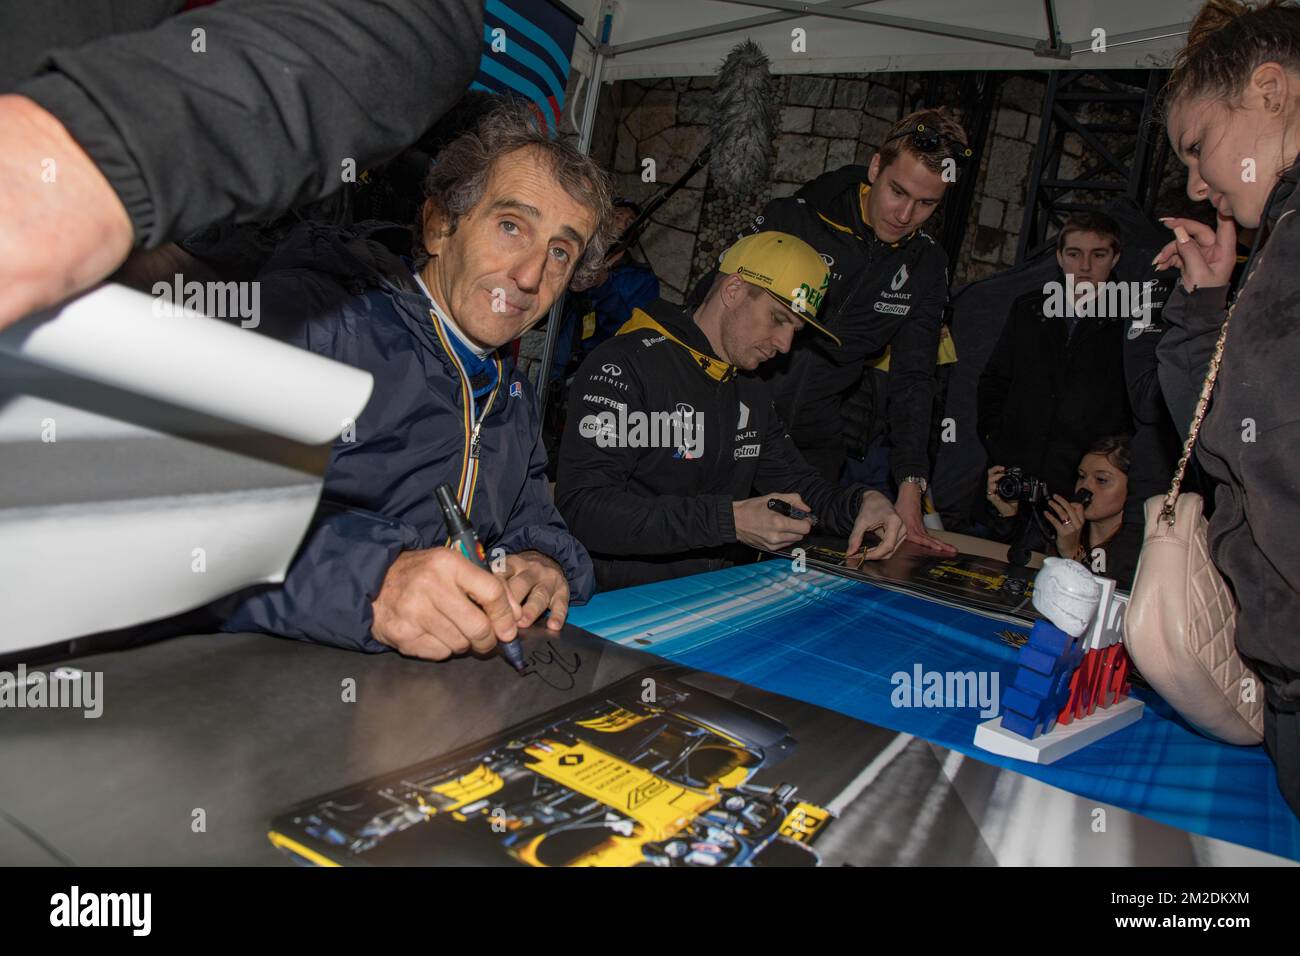 Alain Prost, Quadruple F1 World Champion and Nico Hulkenberg, Official driver of the Renault Sport Formula One Team team in signing sessions in Nice. | Alain Prost, Quadruple champion du monde de F1 et Nico Hulkenberg, Pilote officiel de l'écurie de la Renault Sport Formula One Team en séance de dédicaces à Nice . 11/03/2018 Stock Photo